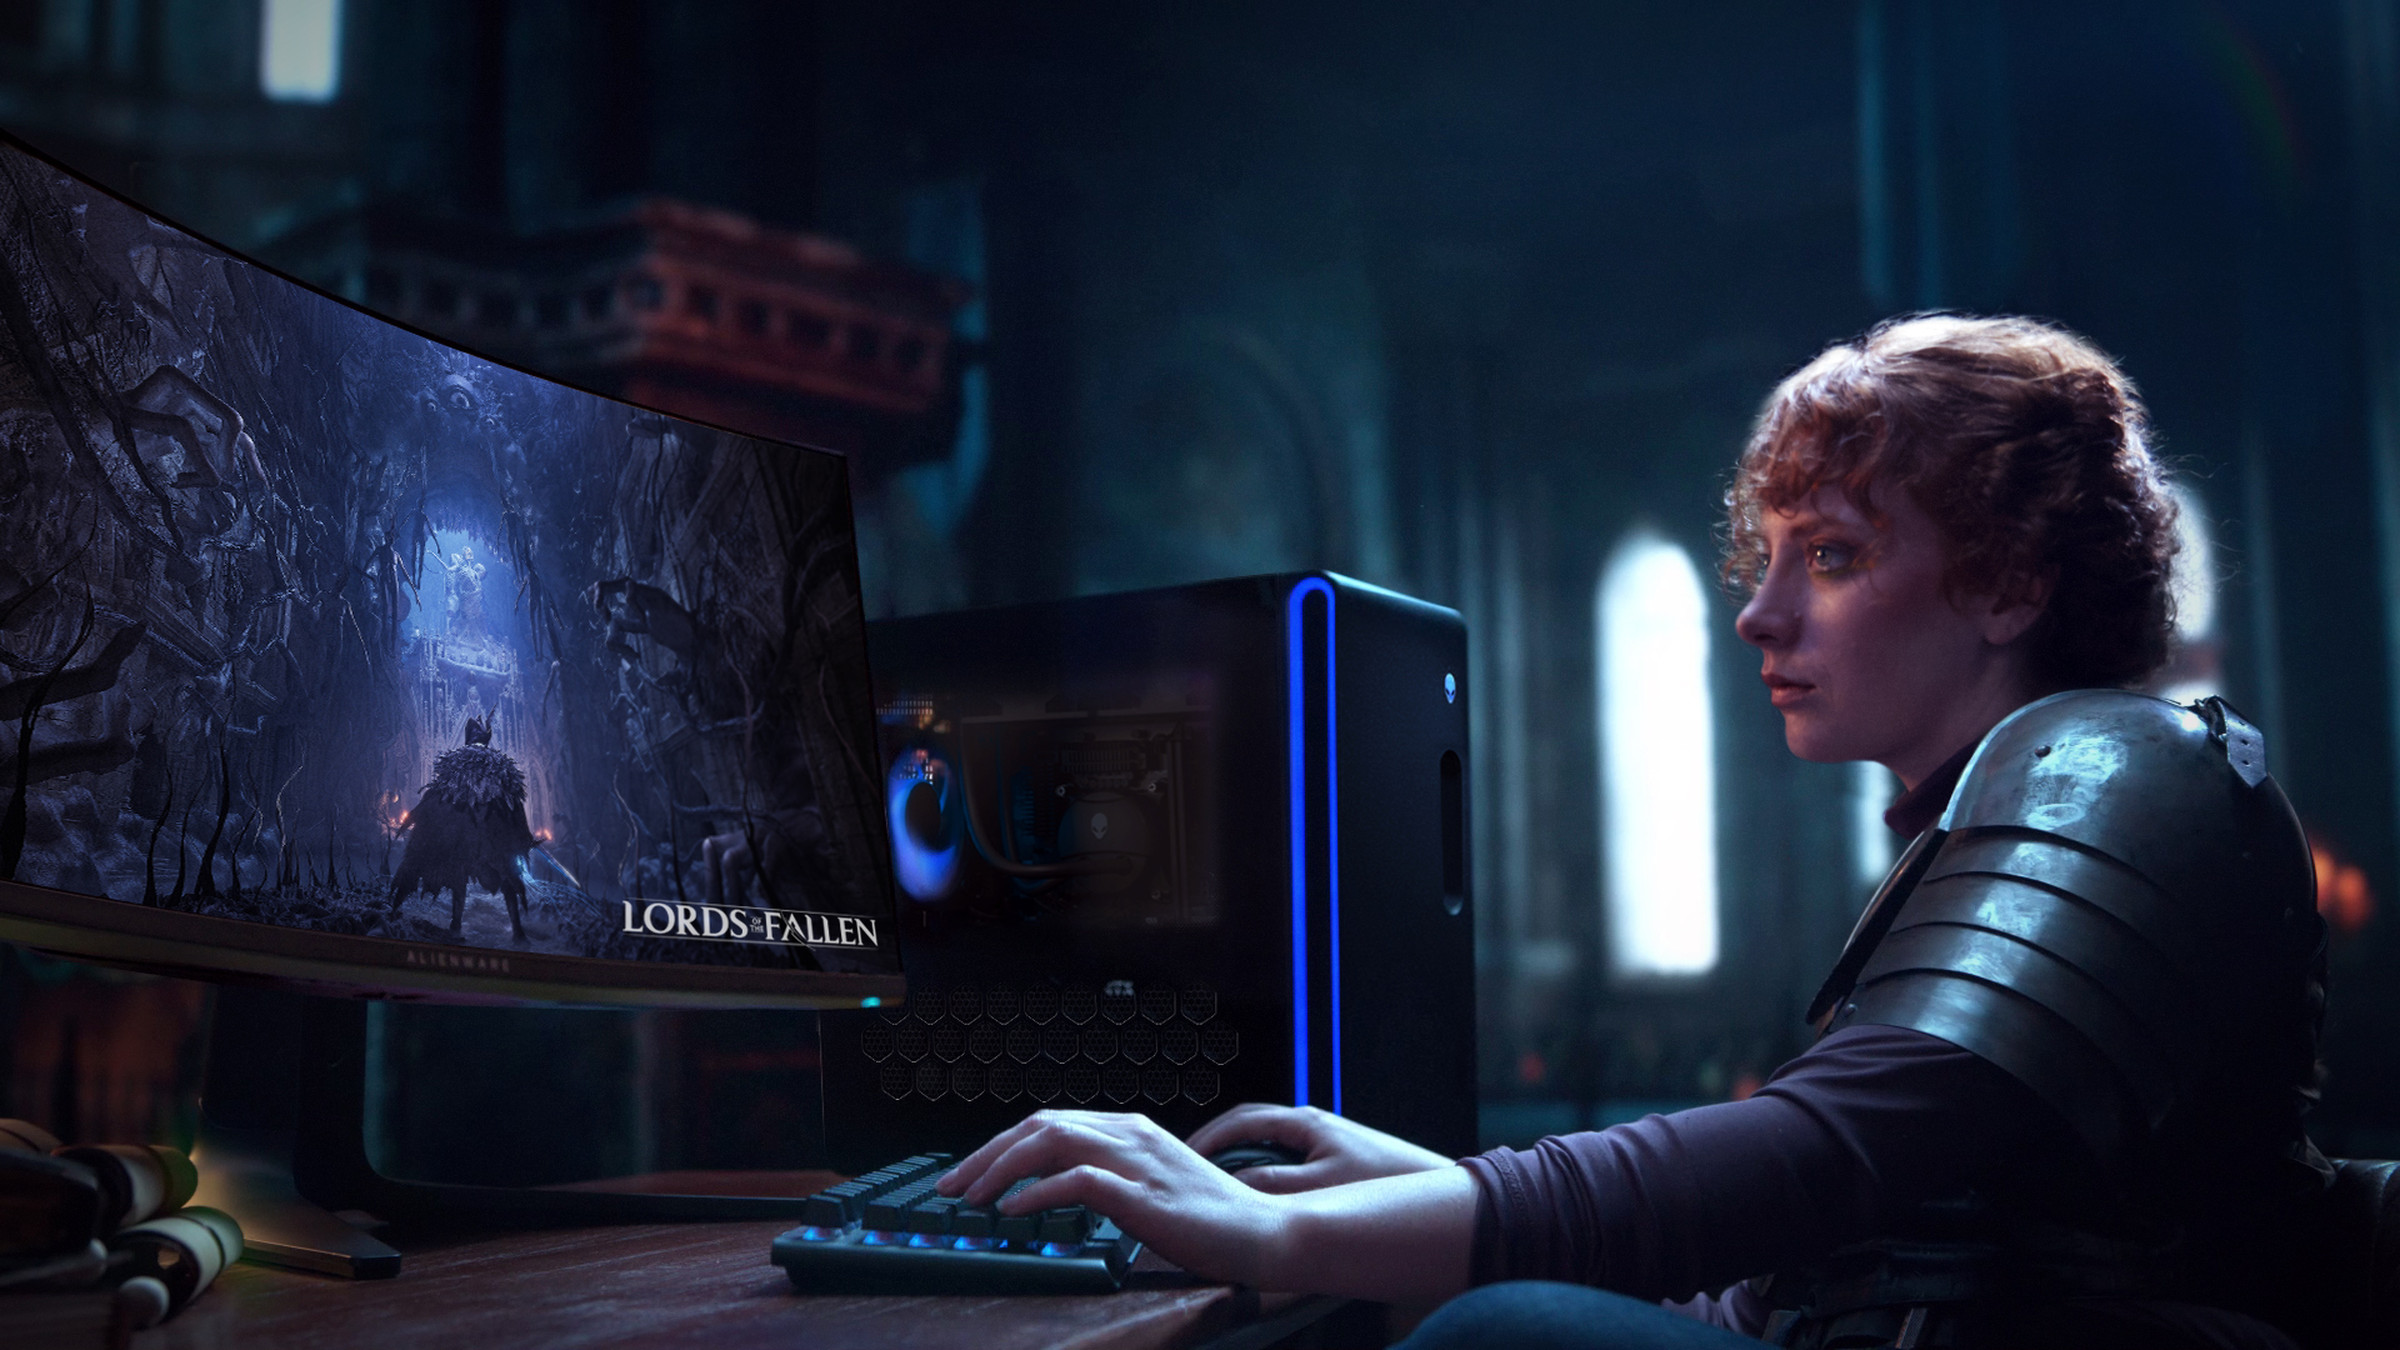 A person playing a game with the Aurora R16 next to their monitor on the desk, picture taken from the side.